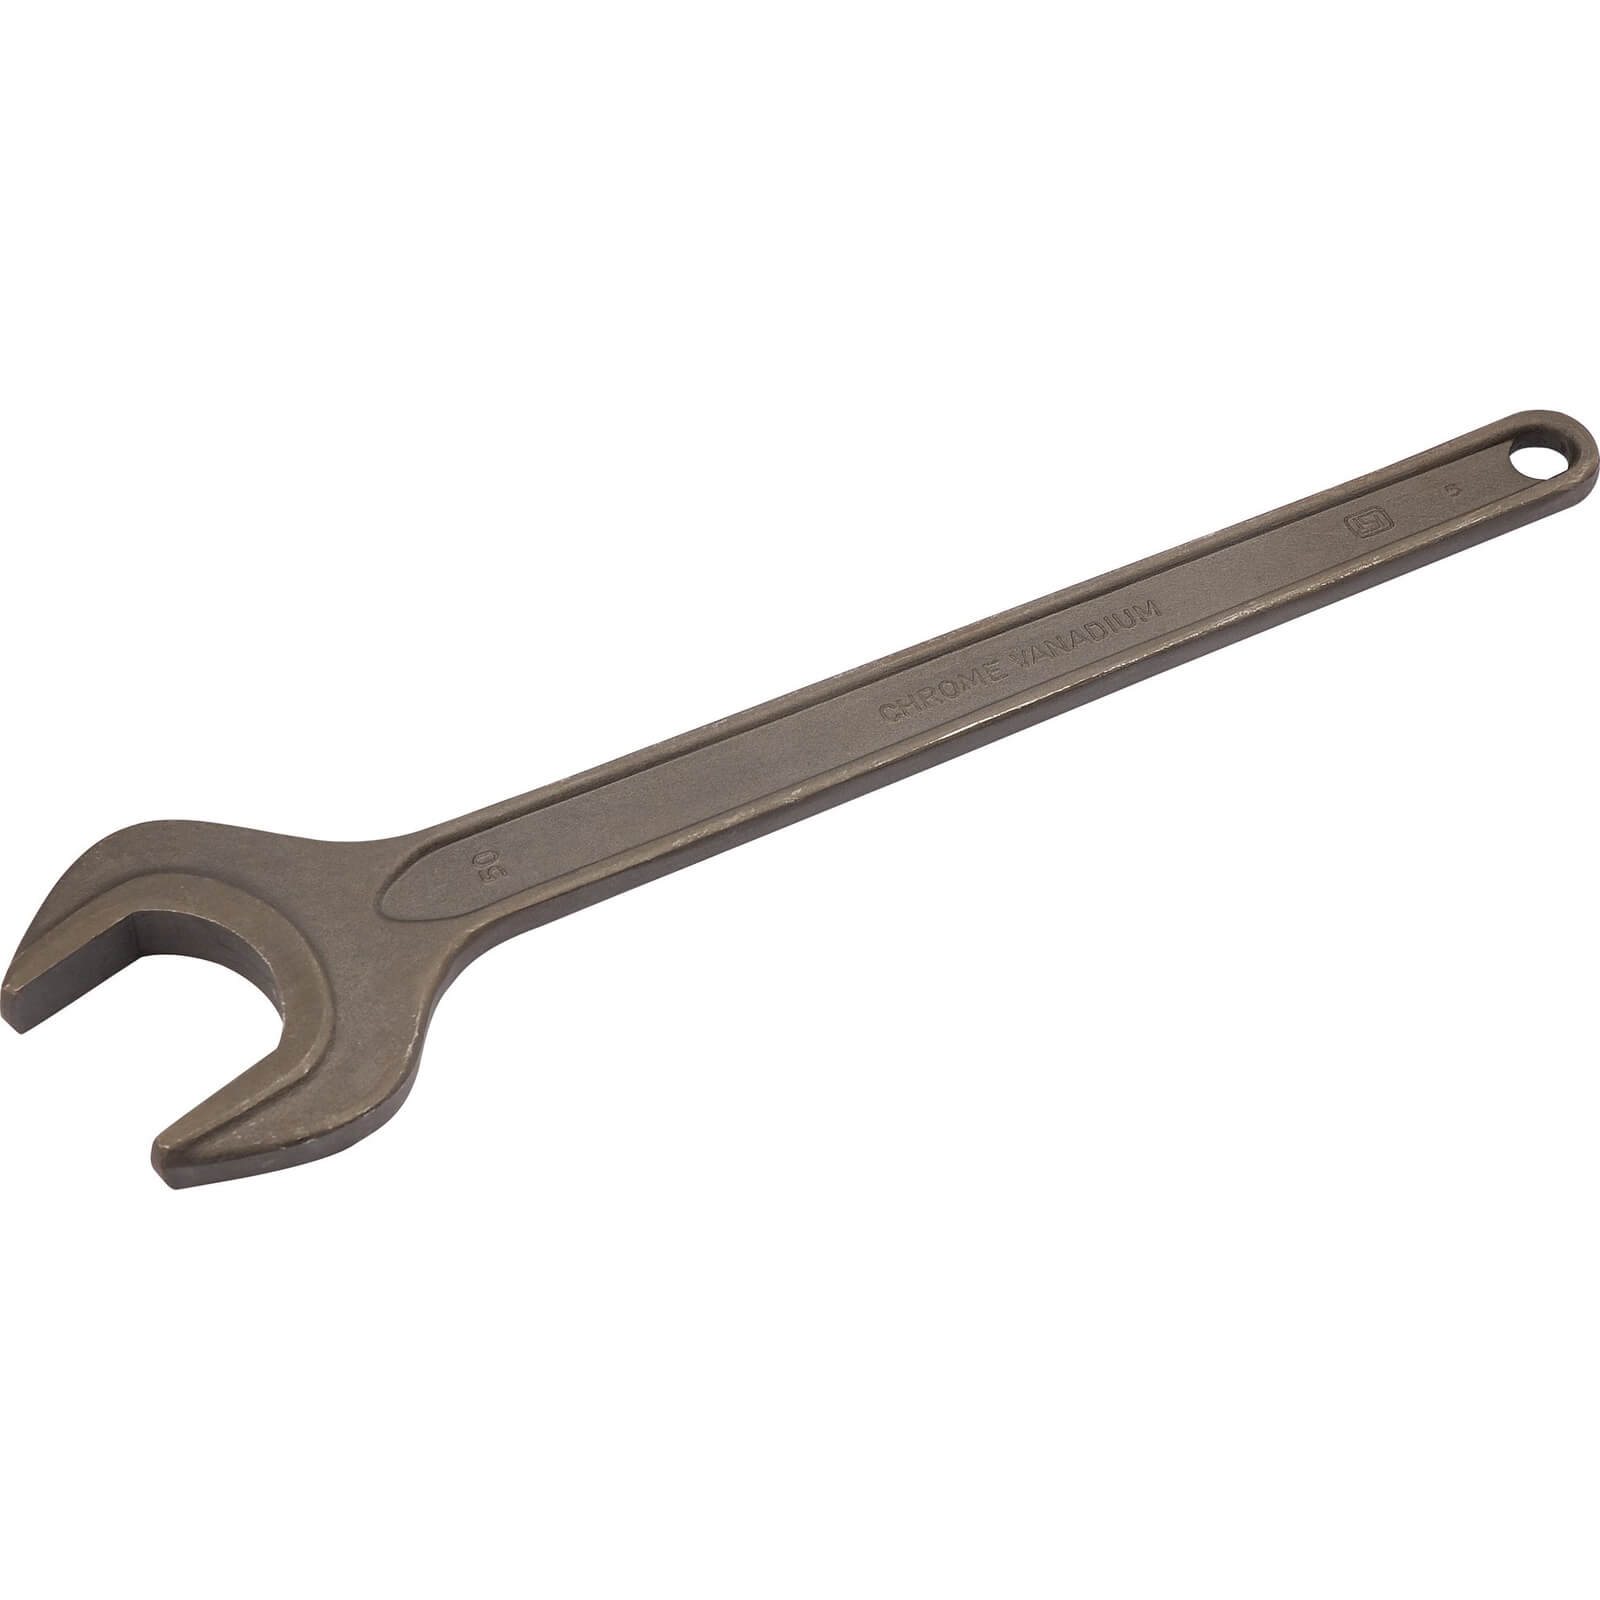 Photos - Wrench Draper Single Open Ended Spanner Metric 50mm 5894 